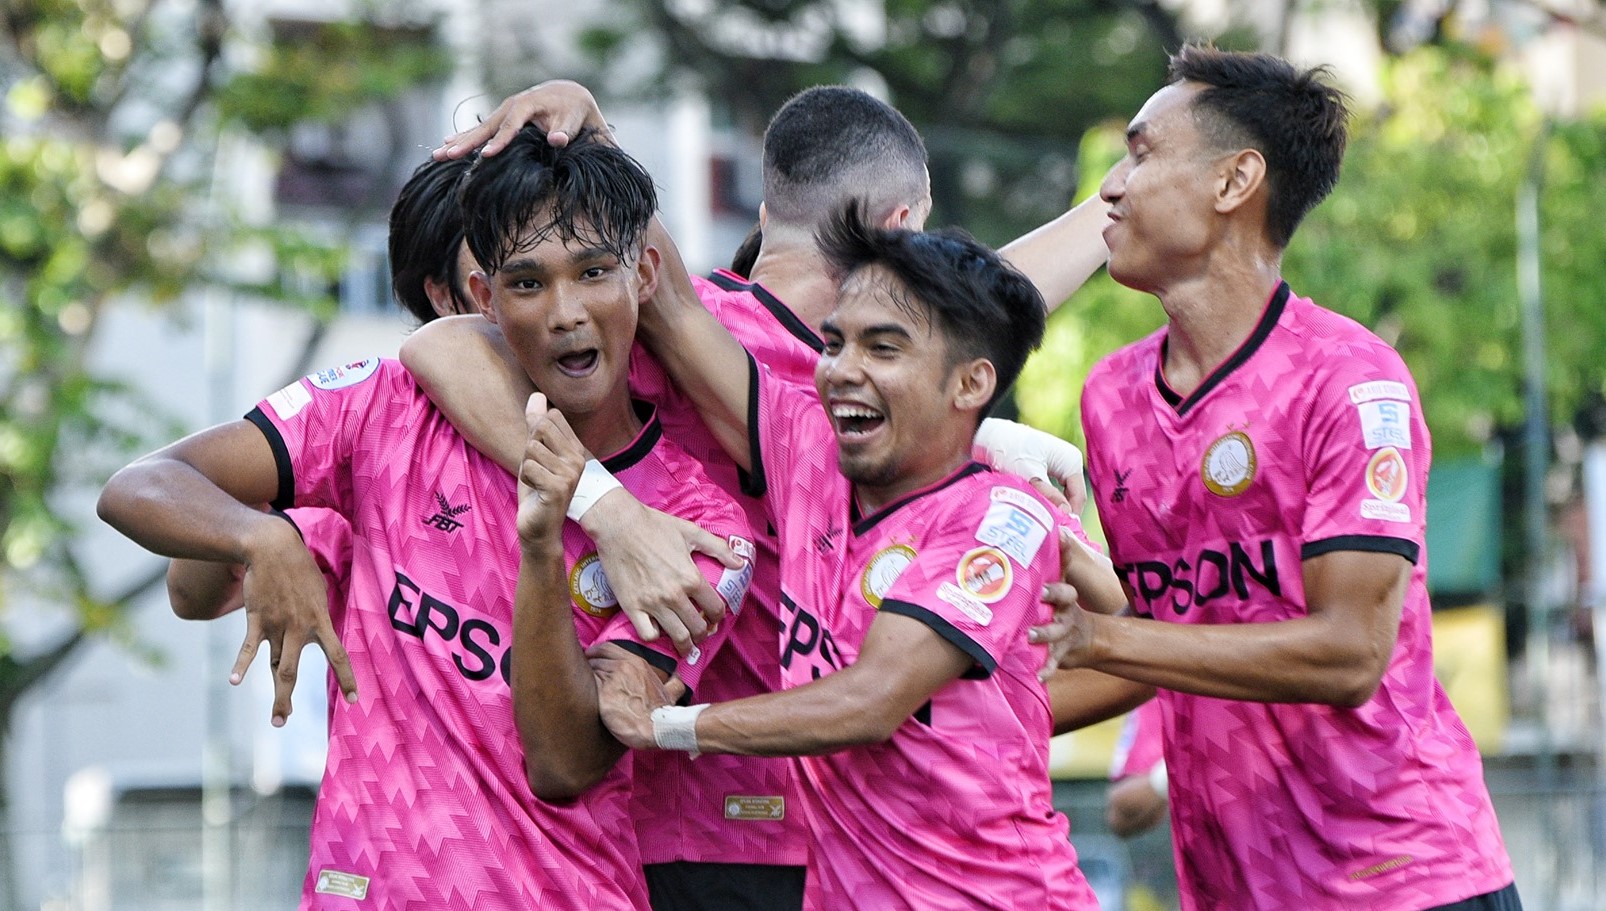 SPL : Geylang Eagles soar to their 2nd straight win, after taking down Tanjong Pagar Utd 3-1!